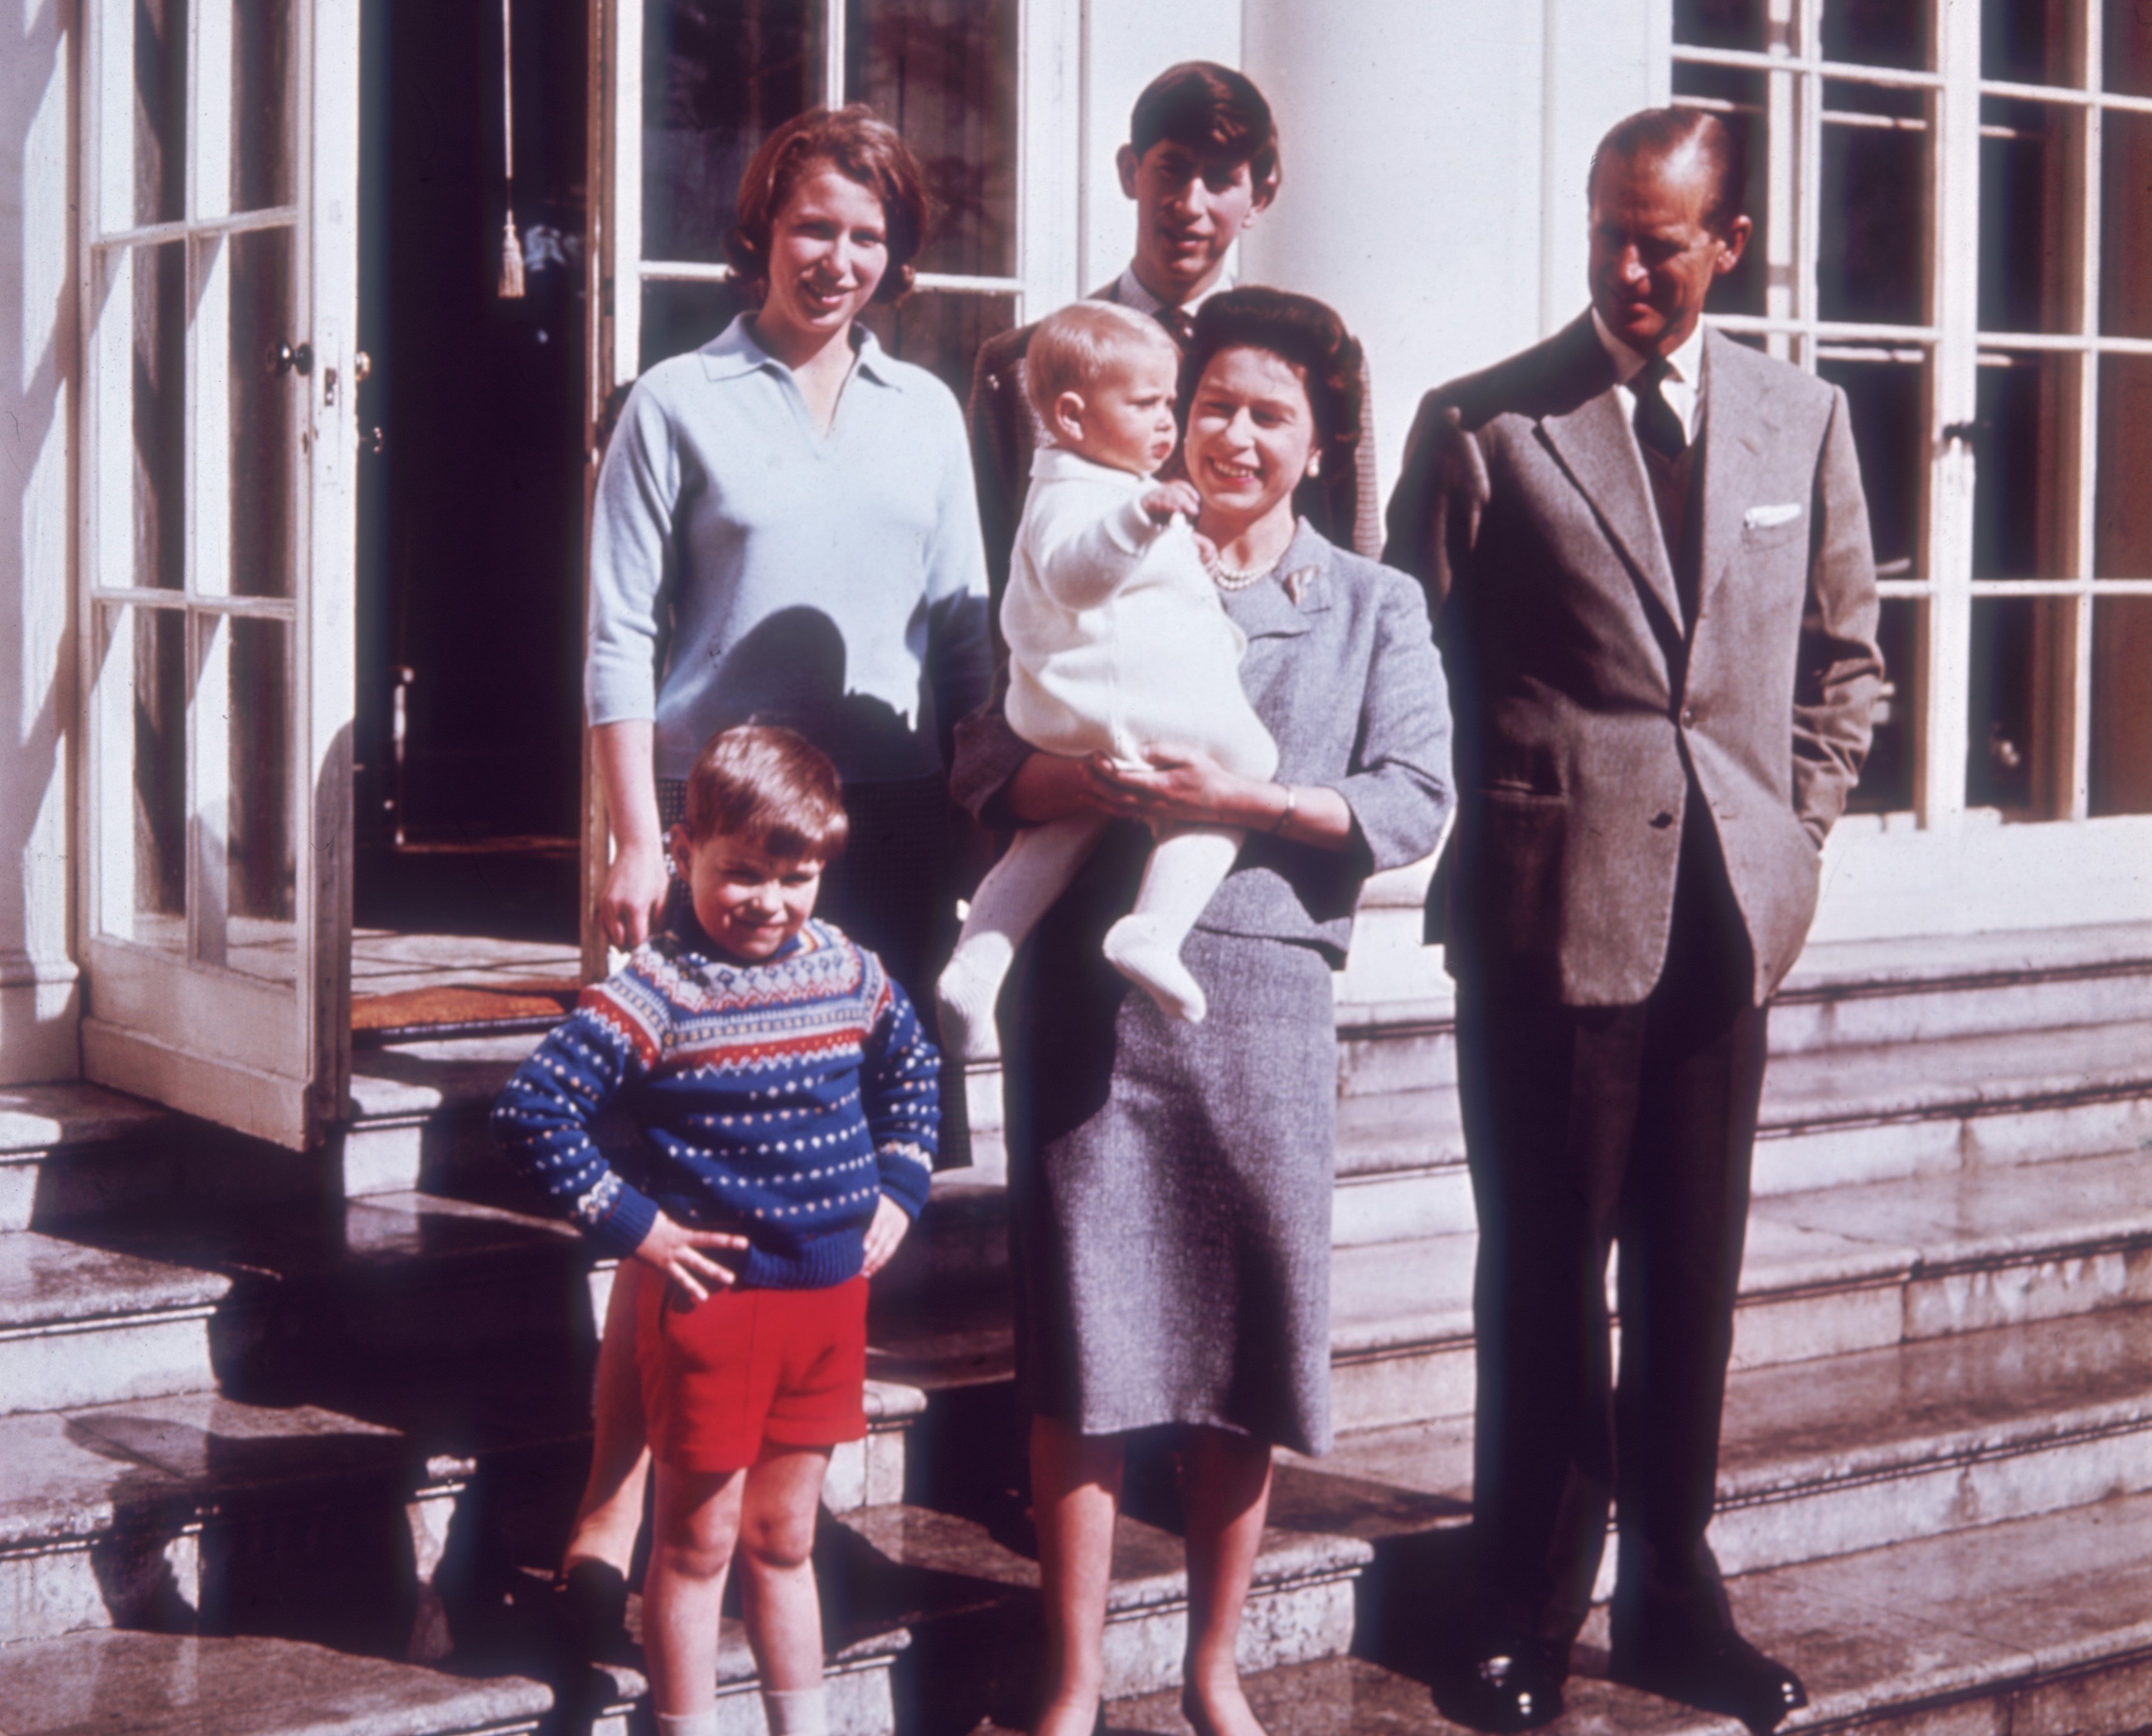 Queen Elizabeth II and Prince Philip with their children, Prince Charles, Princess Anne, Prince Andrew, and Prince Edward